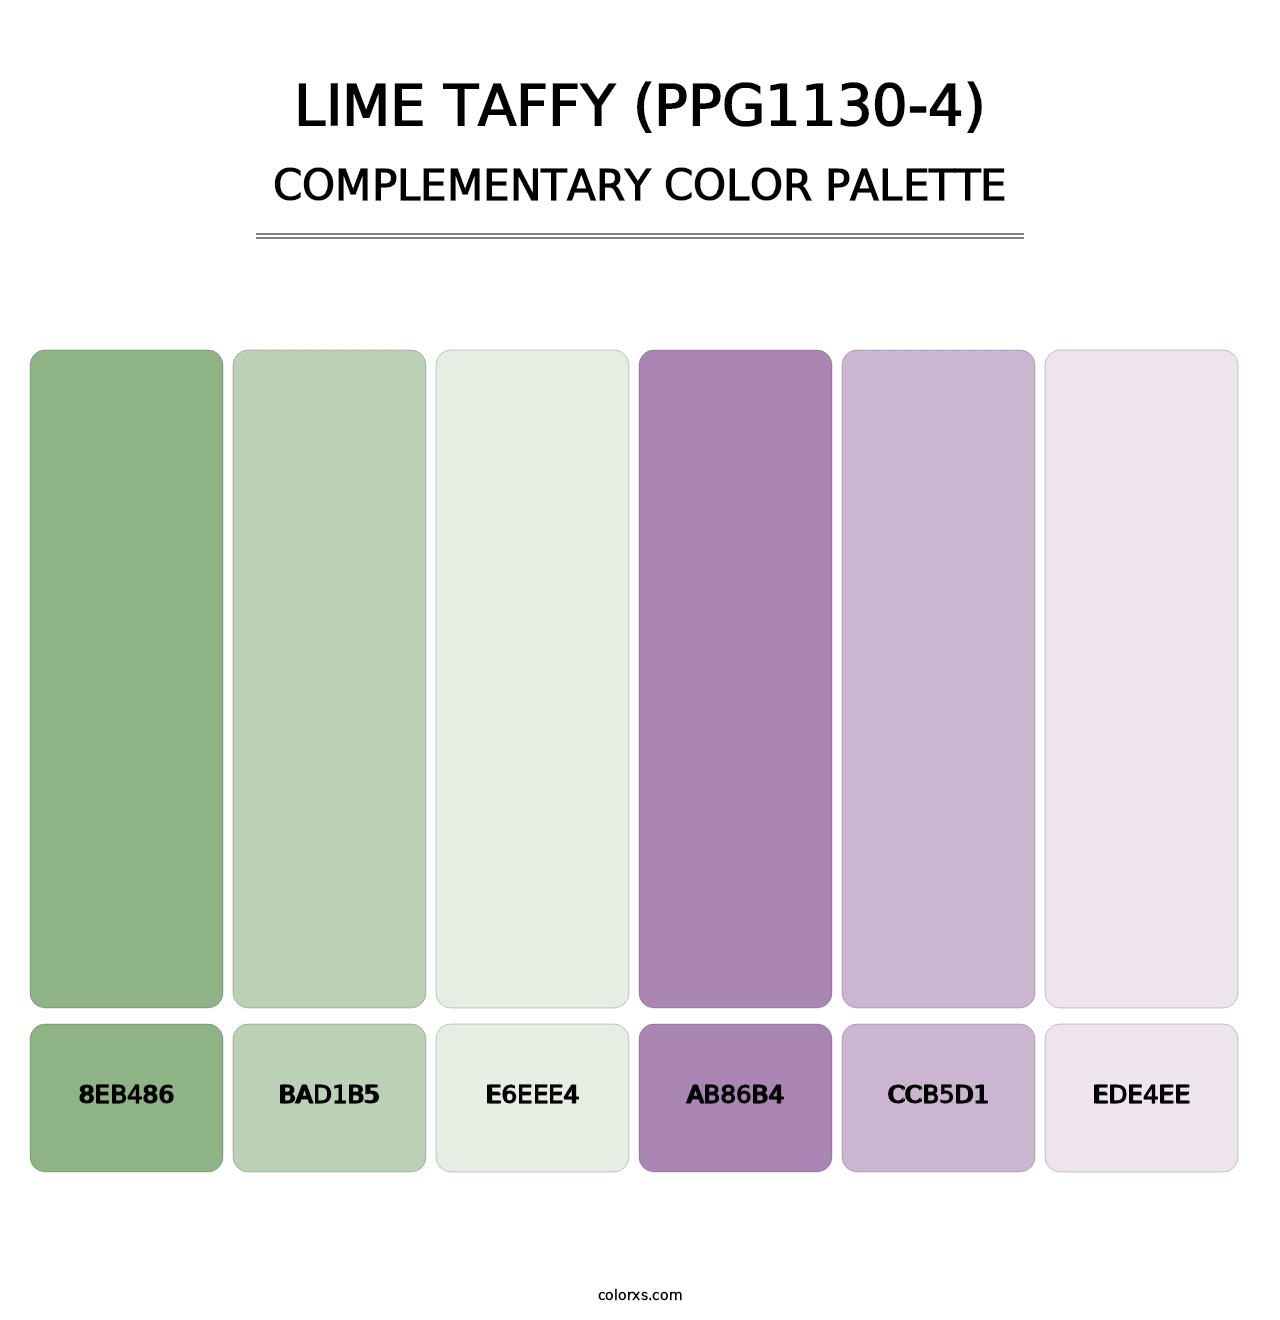 Lime Taffy (PPG1130-4) - Complementary Color Palette